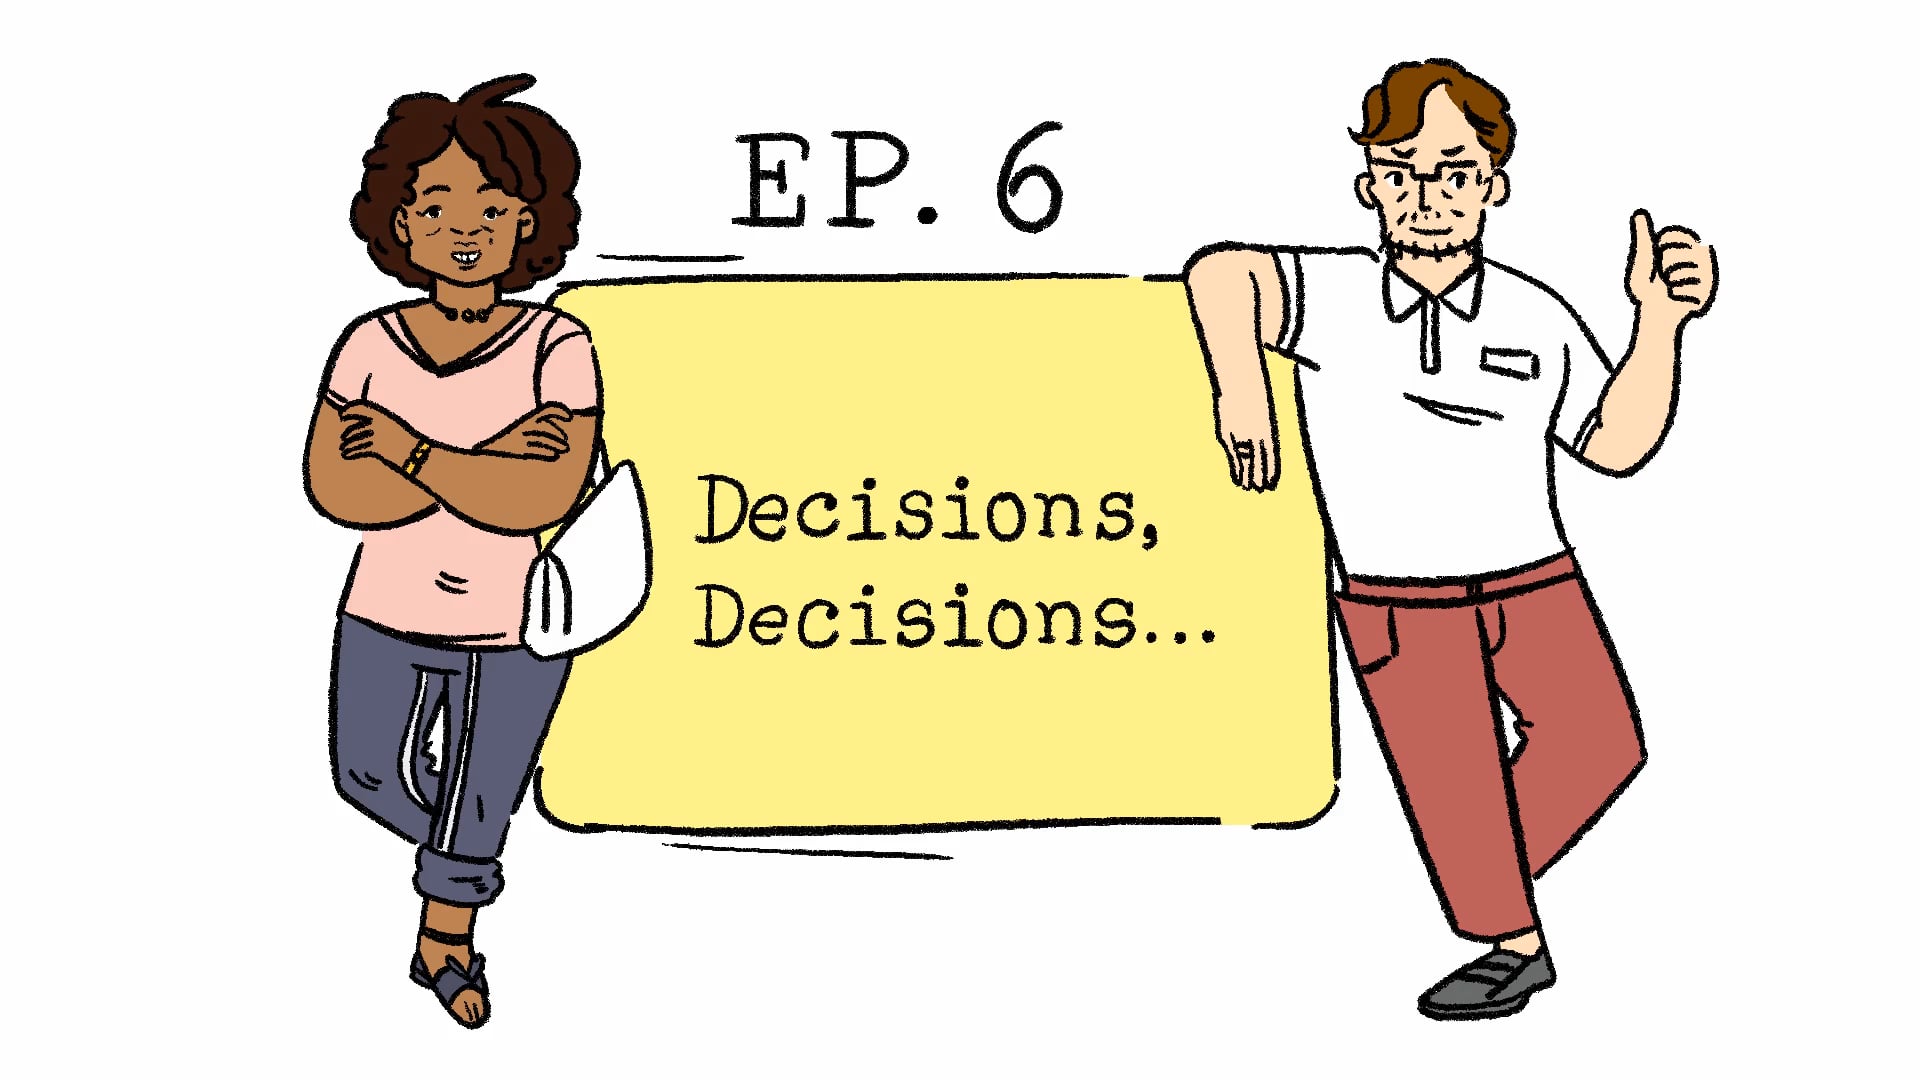 What is Type 2 Diabetes? - Ep. 6 "Decisions, Decisions..."